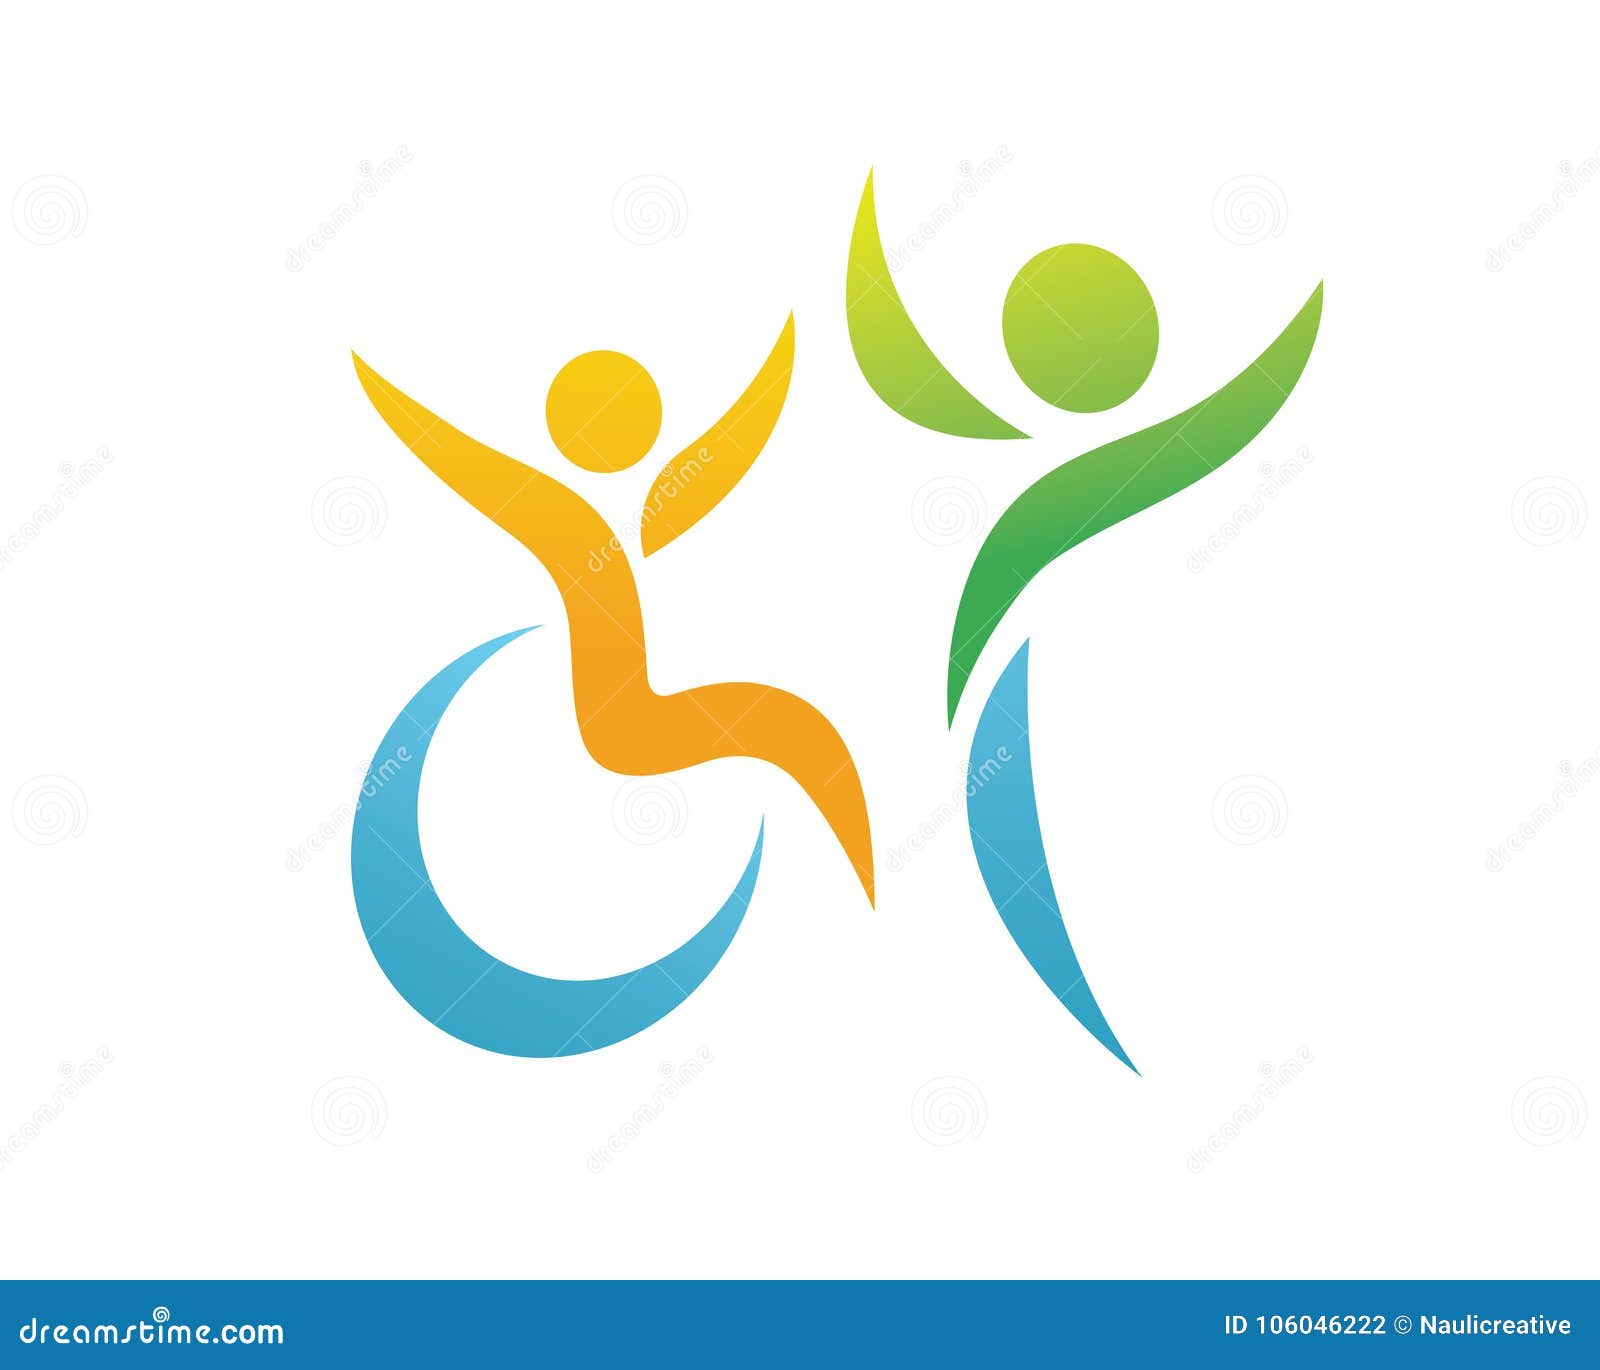 modern passionate disability people support logo